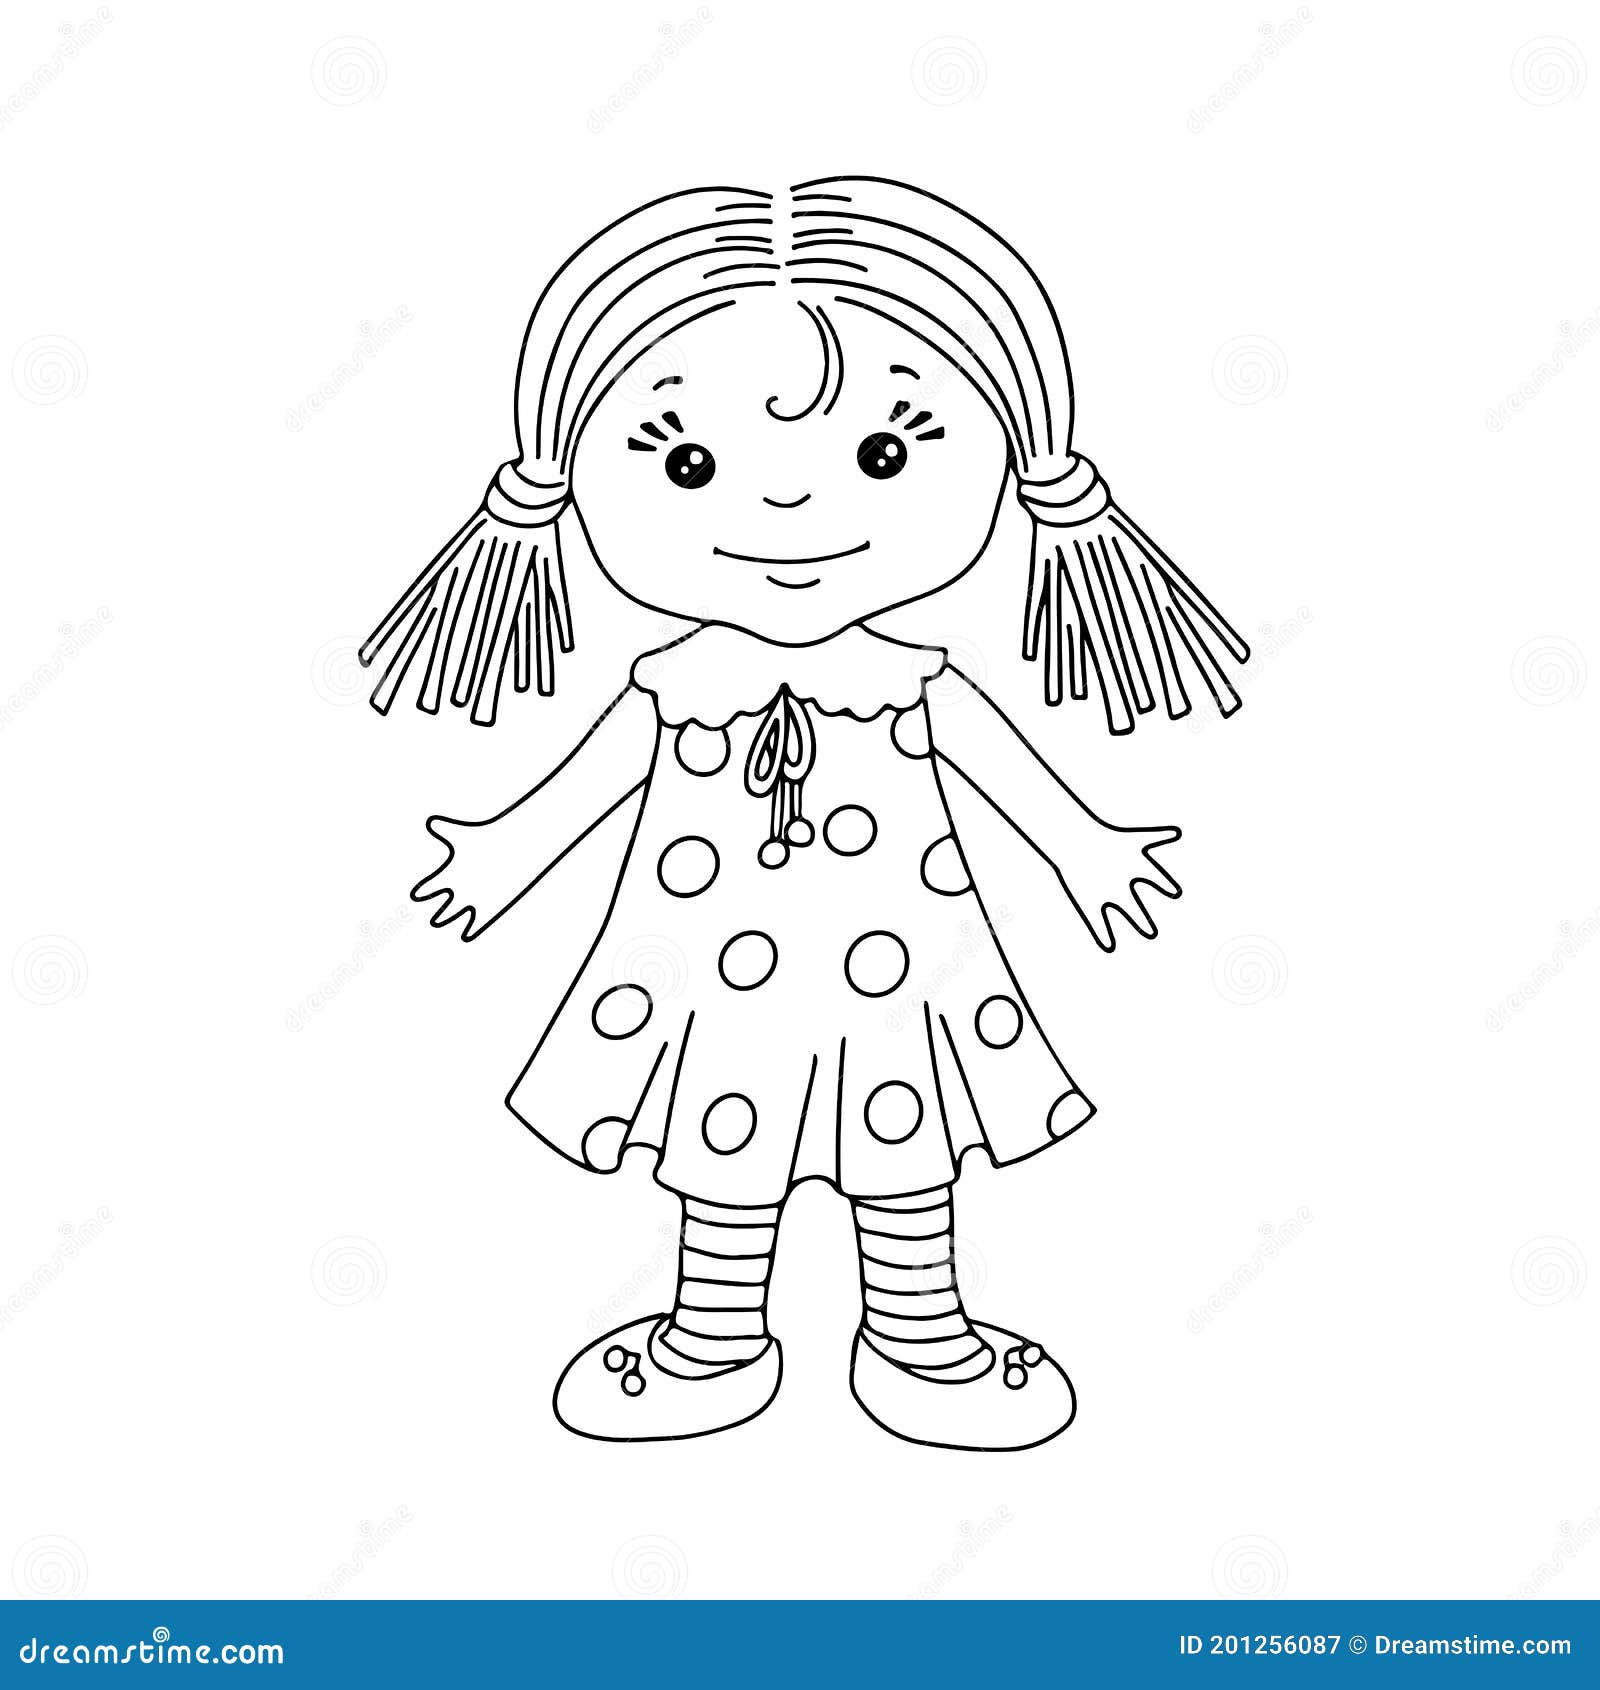 cute cartoon doll little girl coloring page book chilren toy concept black white illustration vector eps 201256087